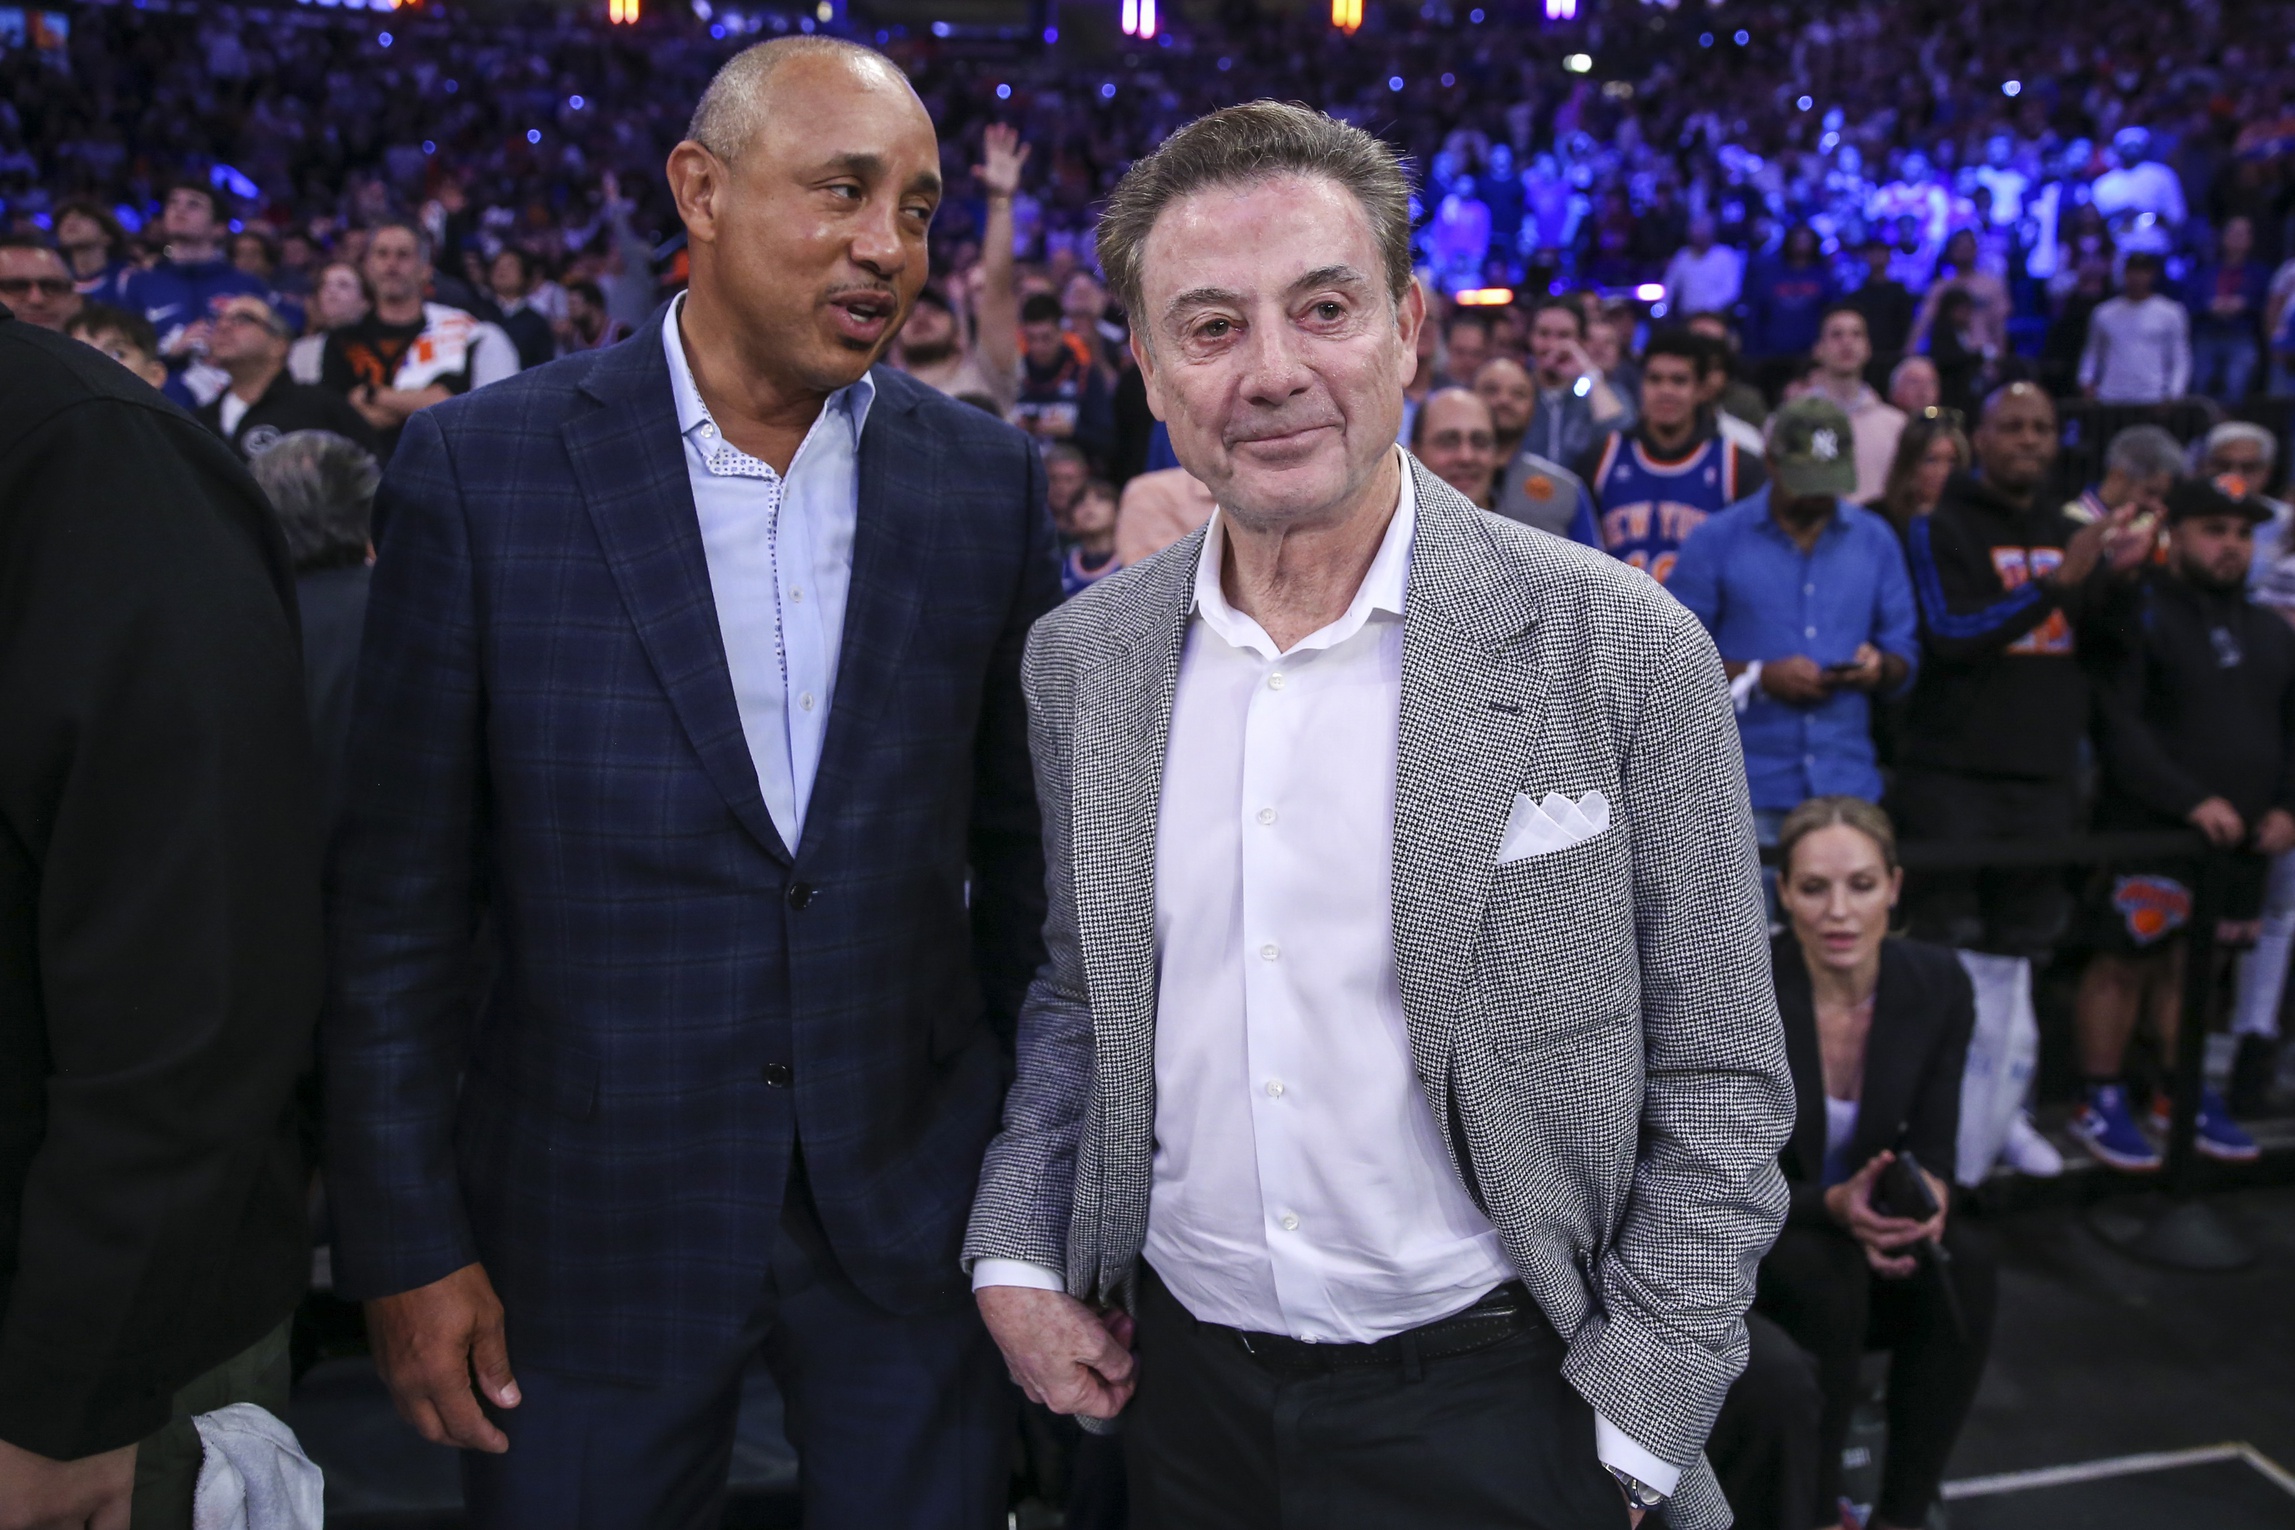 Apr 23, 2023; New York, New York, USA; Former New York Knicks guard John Starks (l) and St. John’s Red Storm head coach Rick Pitino interact during game four of the 2023 NBA playoffs between the Cleveland Cavaliers and the New York Knicks at Madison Square Garden. Mandatory Credit: Wendell Cruz-USA TODAY Sports